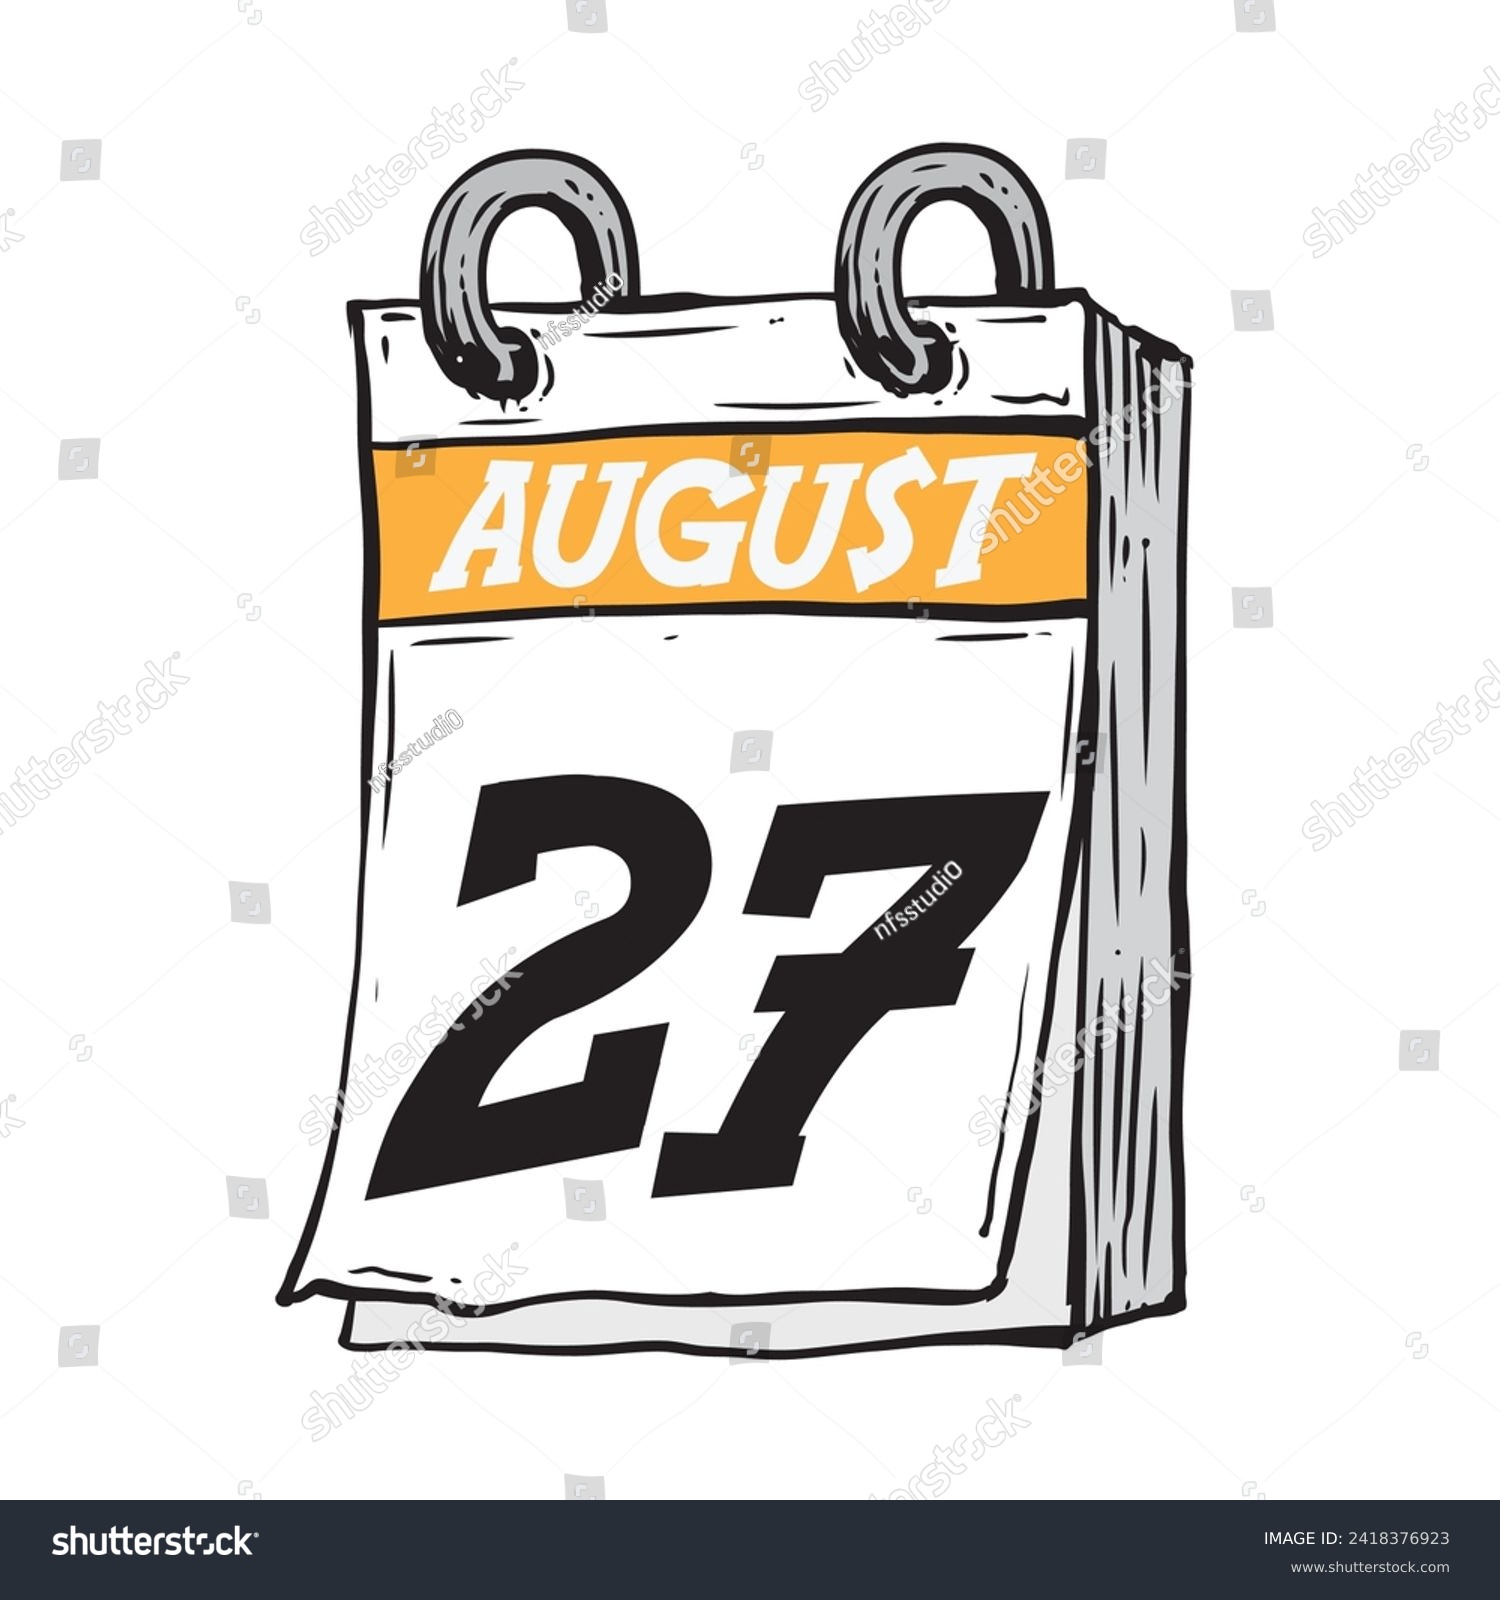 SVG of Simple hand drawn daily calendar for August line art vector illustration date 27, August 27th svg